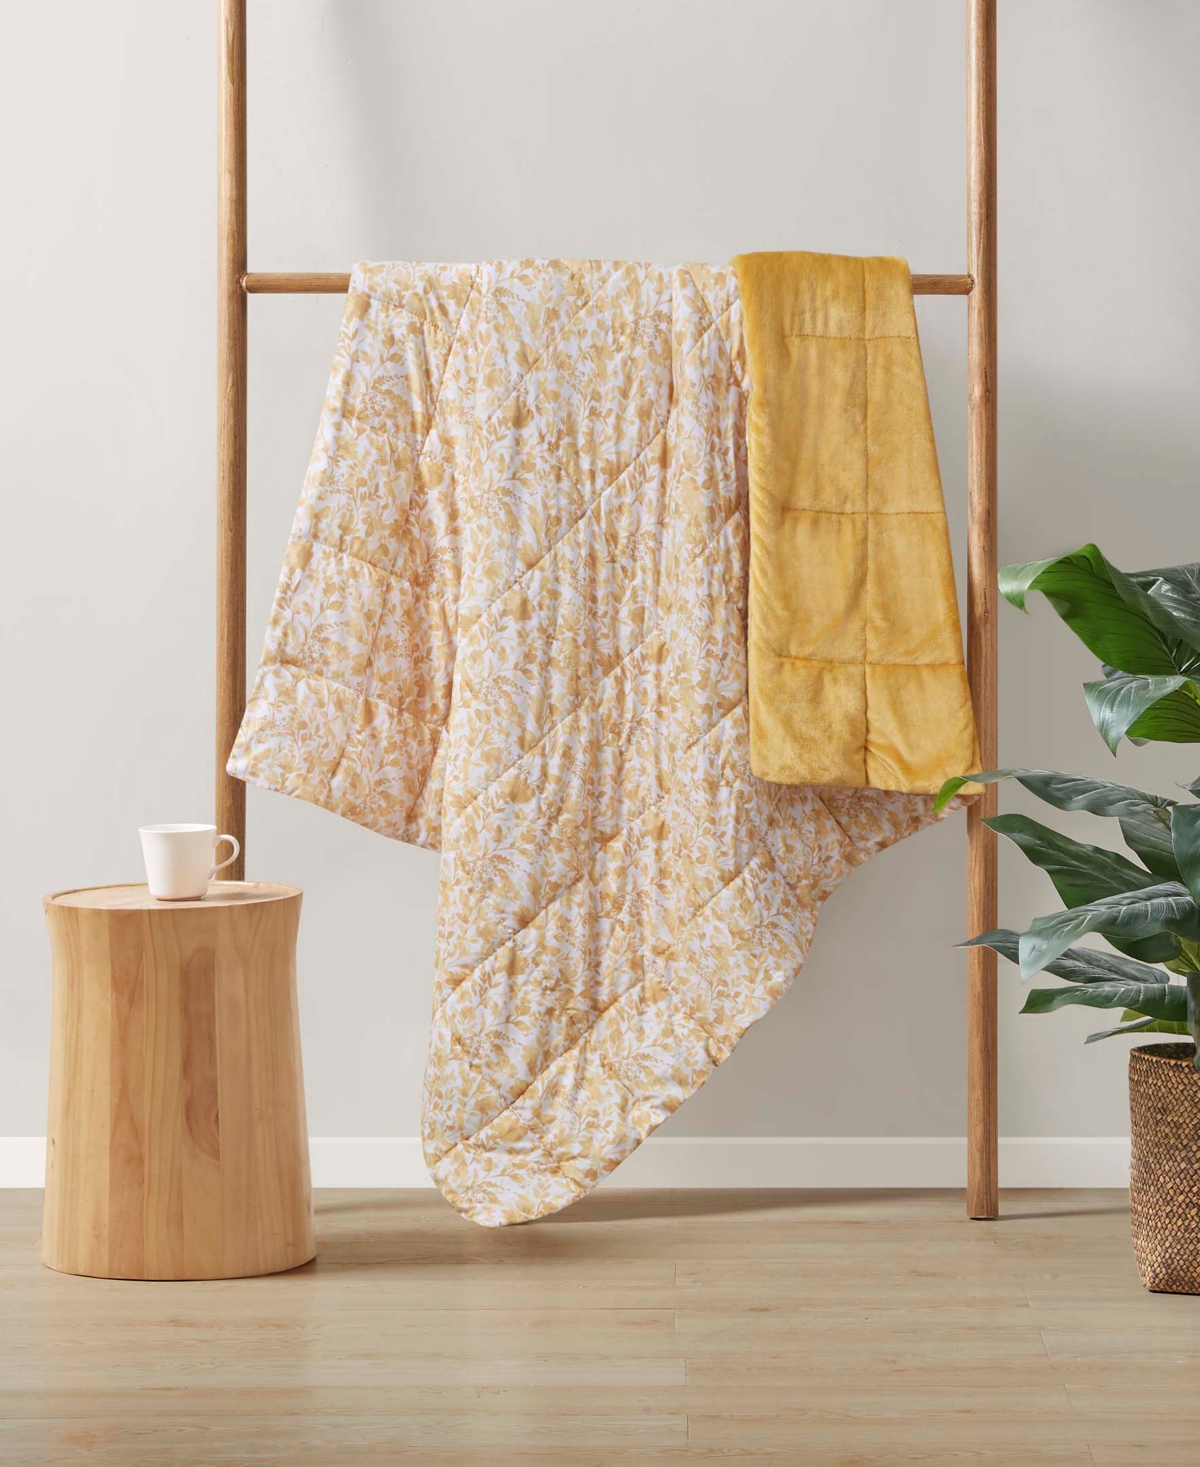 Clean Spaces Quilted Throw, 50" X 60" In Floral Yellow